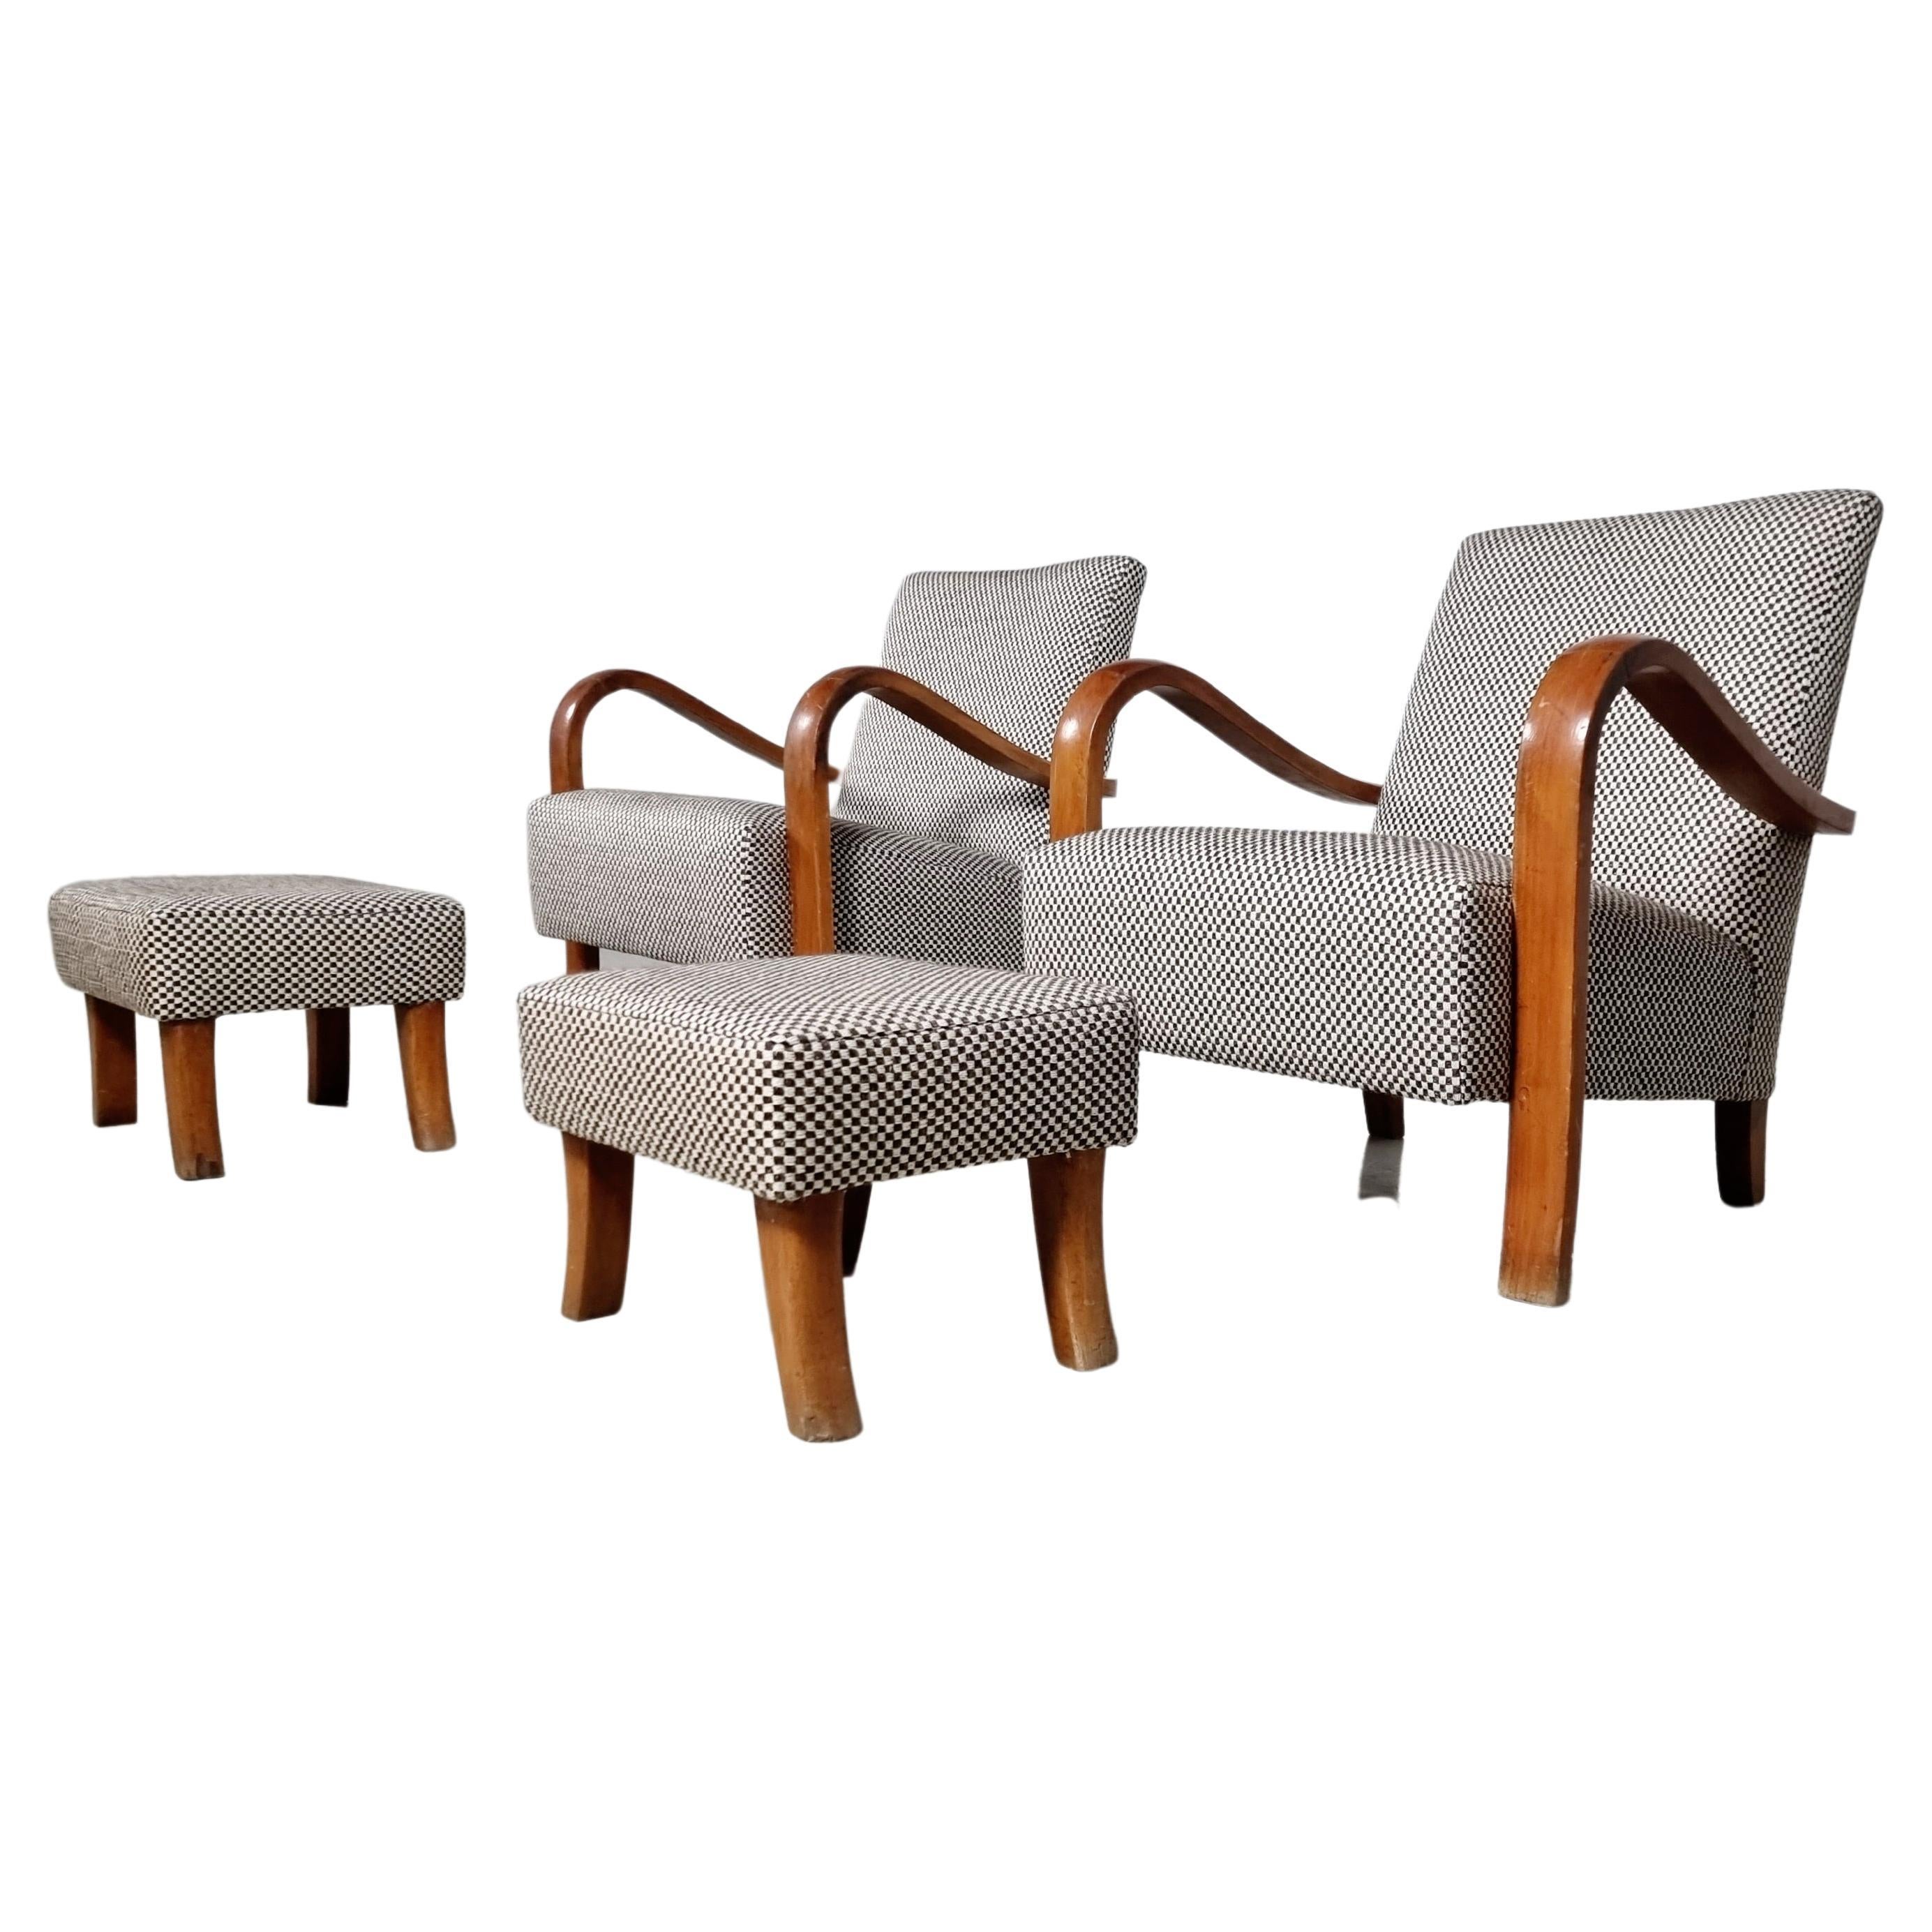 Set of 2 Art Deco Lounge Chairs with Matching Ottomans, France, 1930